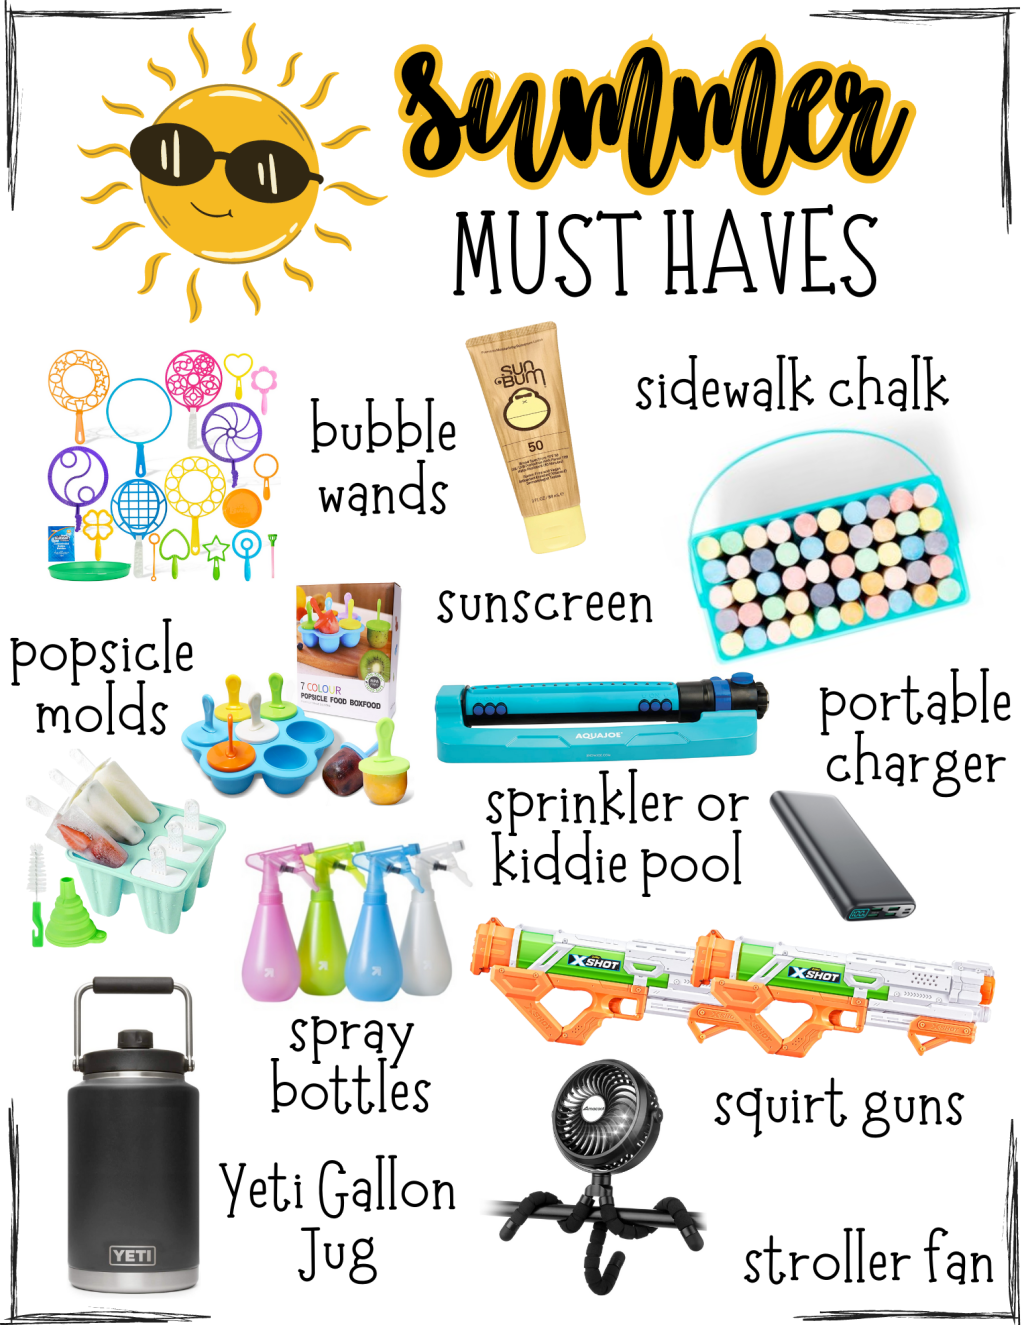 Summer must-haves